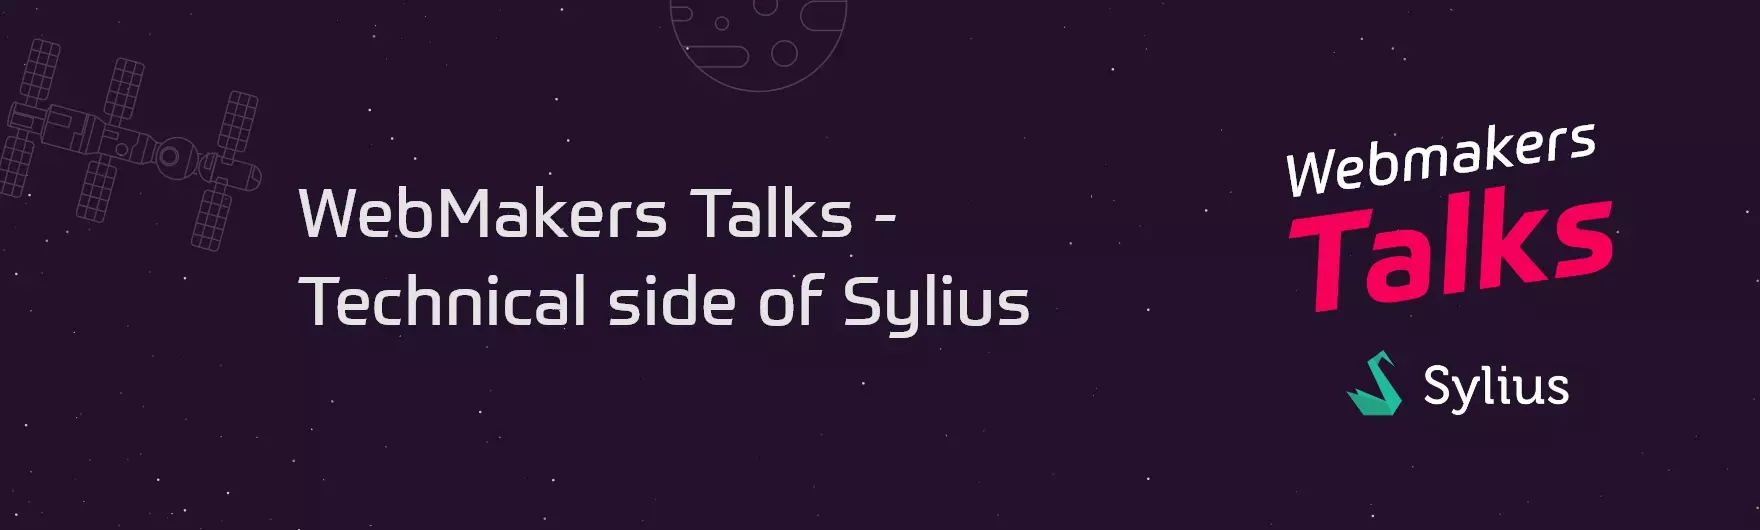 Webmakers talks technical side of Sylius